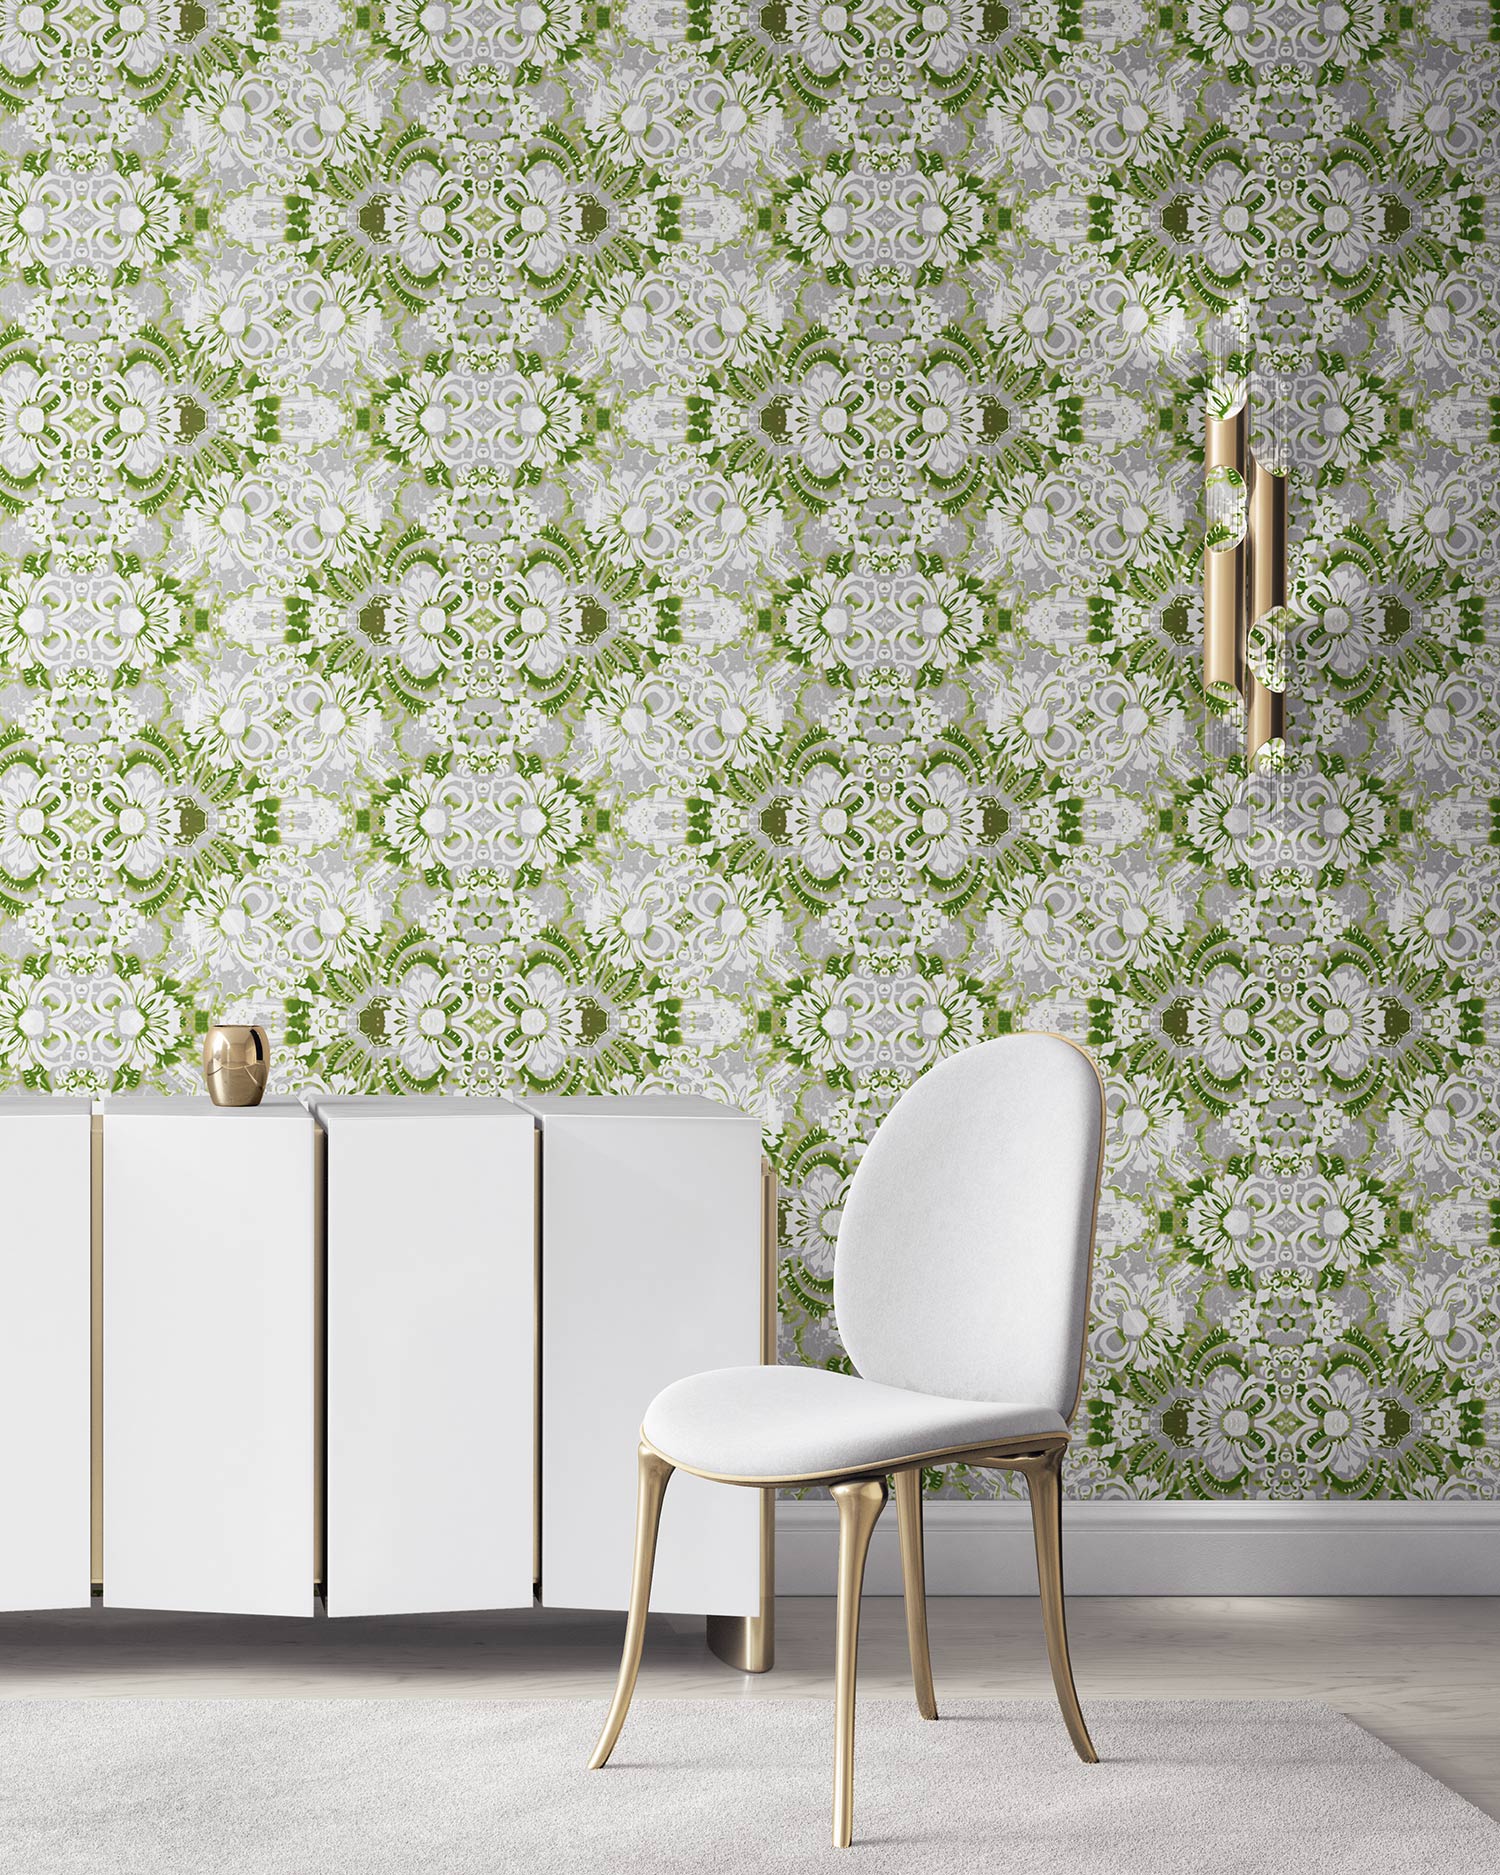 Pearl & Maude's abstract botanical Carmen nonwoven vellum wallpaper in moss green, white and grey installed in a beautiful living room with white and brass furniture.